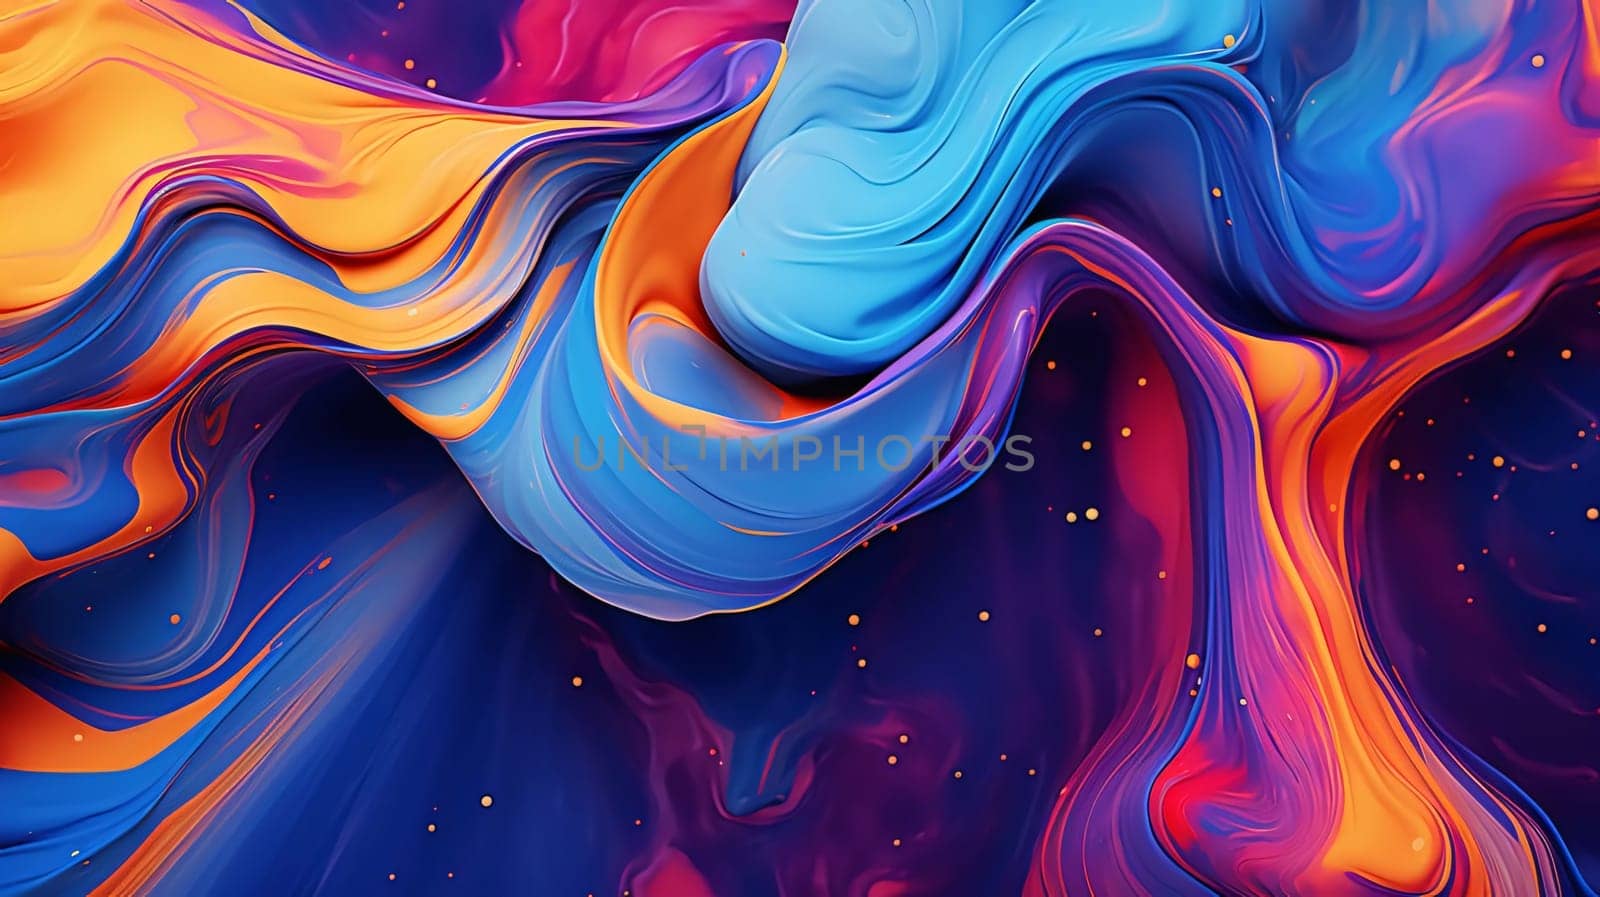 Abstract background design: Abstract background of acrylic paints in blue, orange and purple colors.